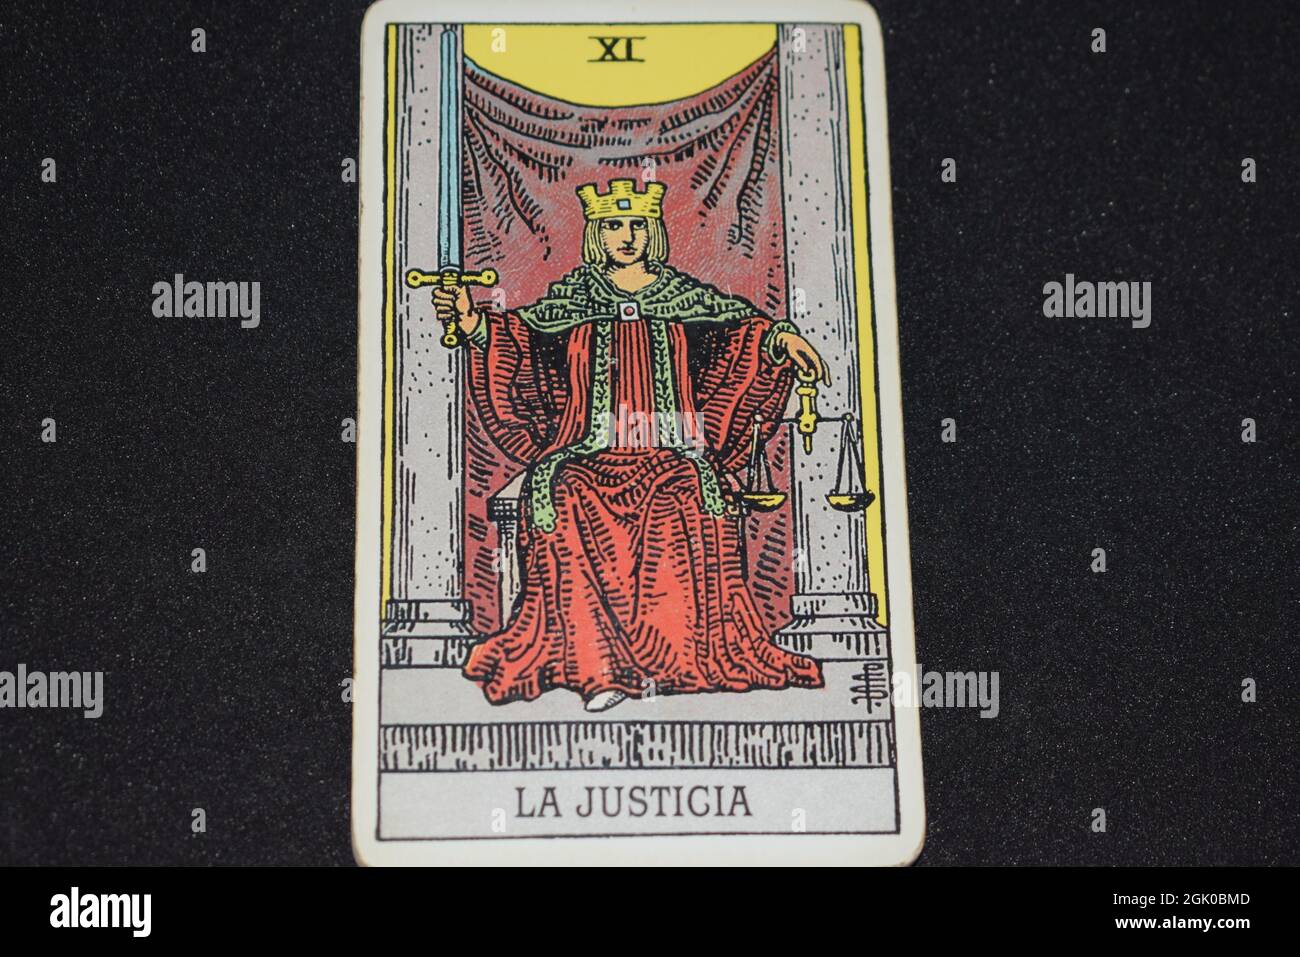 The tarot card number 11 represents JUSTICE in the tarot cards of the major arcana on a black background. Stock Photo